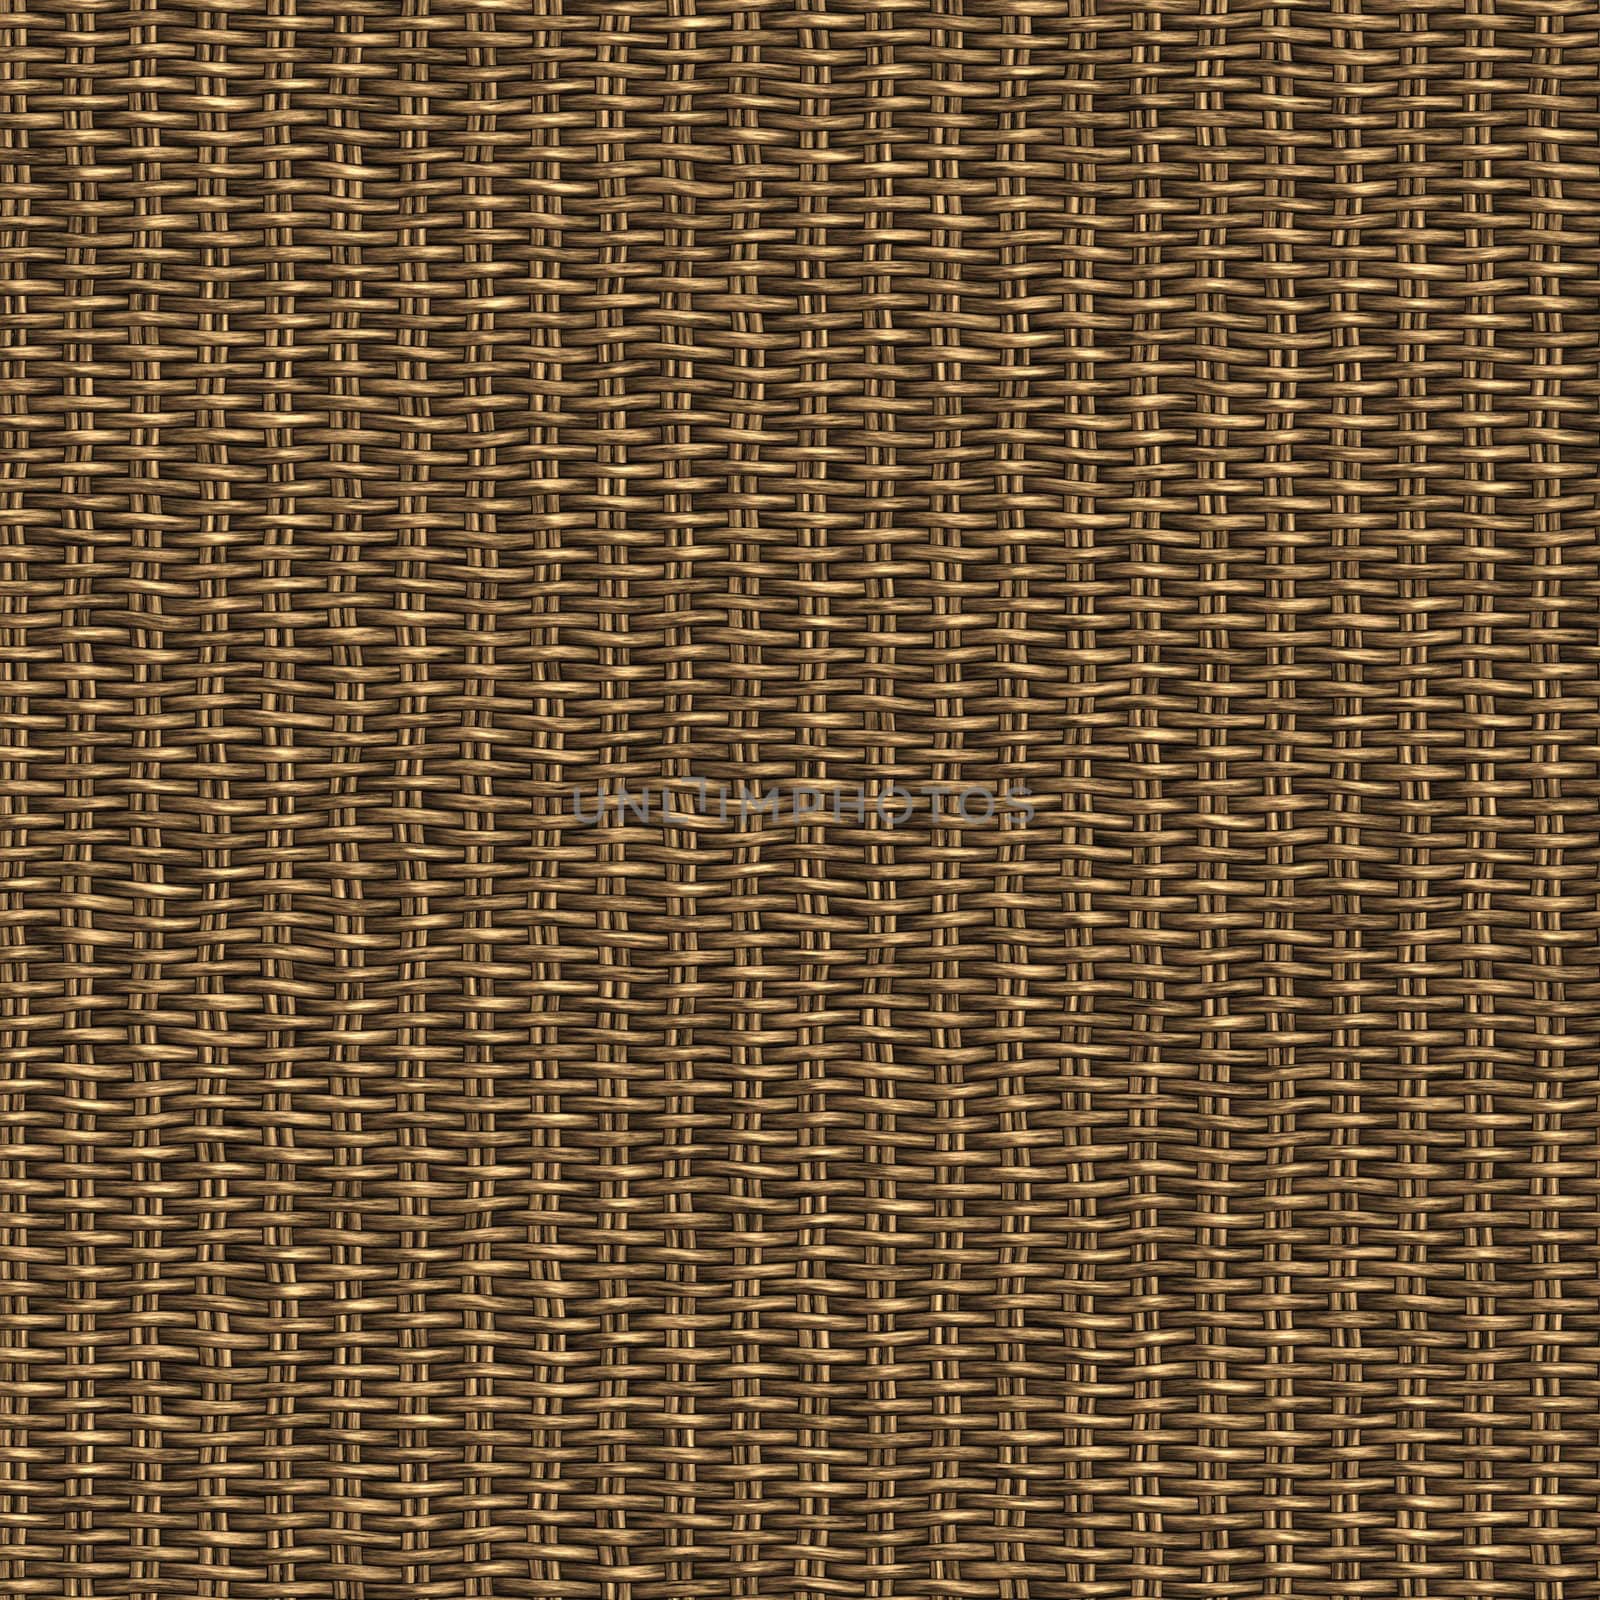 great background image of wooden bambo or wicker basket weave